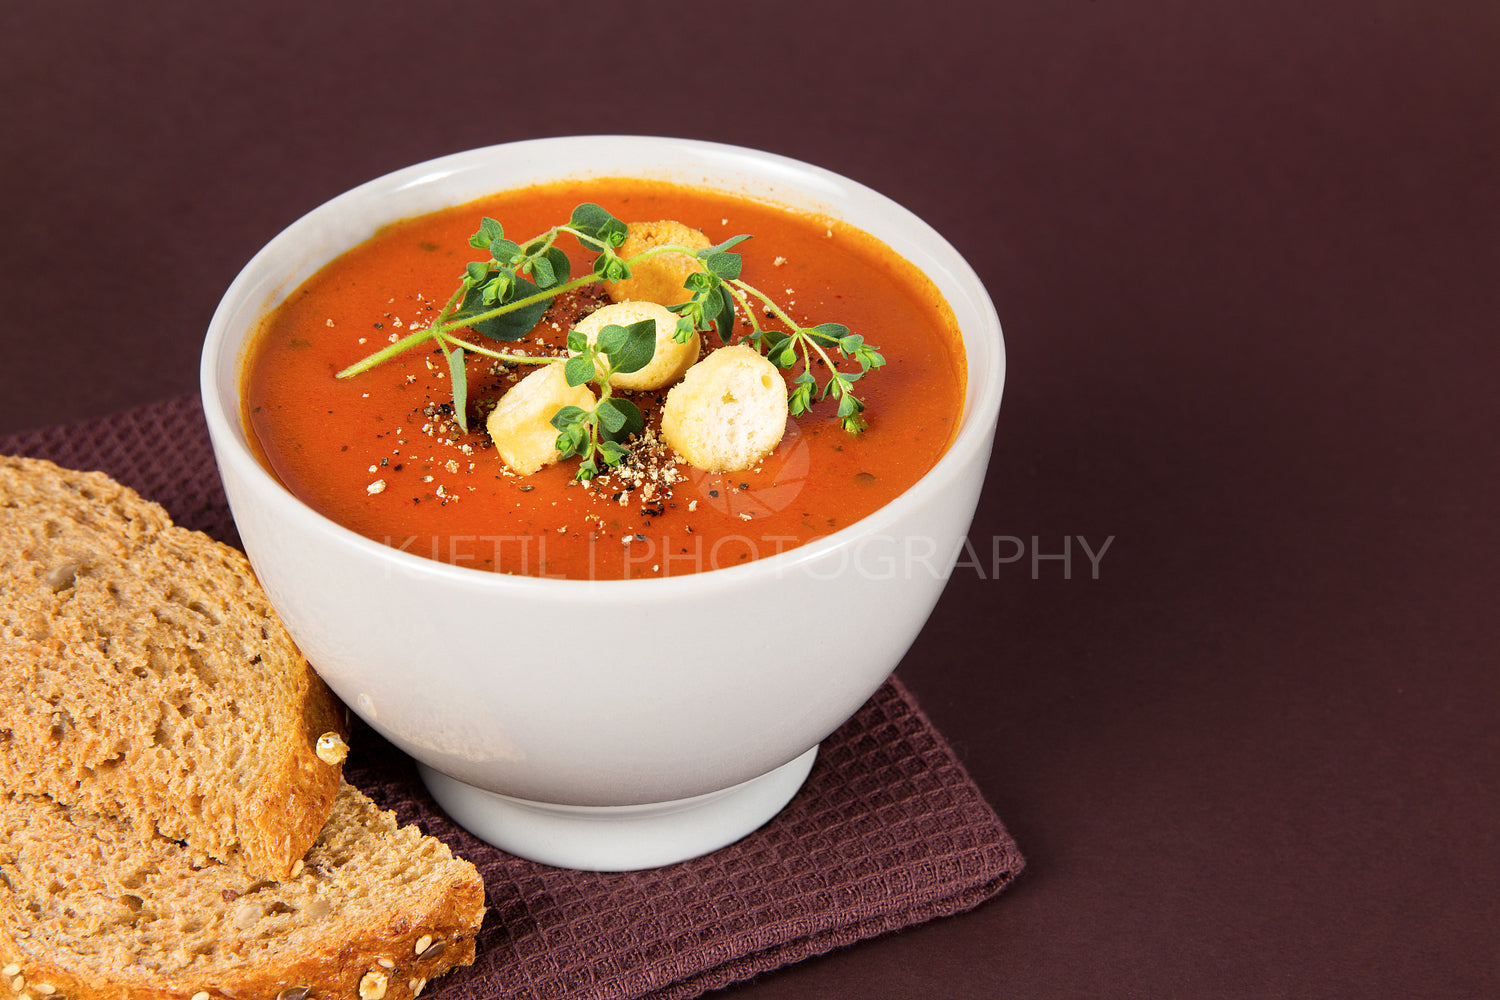 Fresh Tomato Soup with Croutons and Herbs